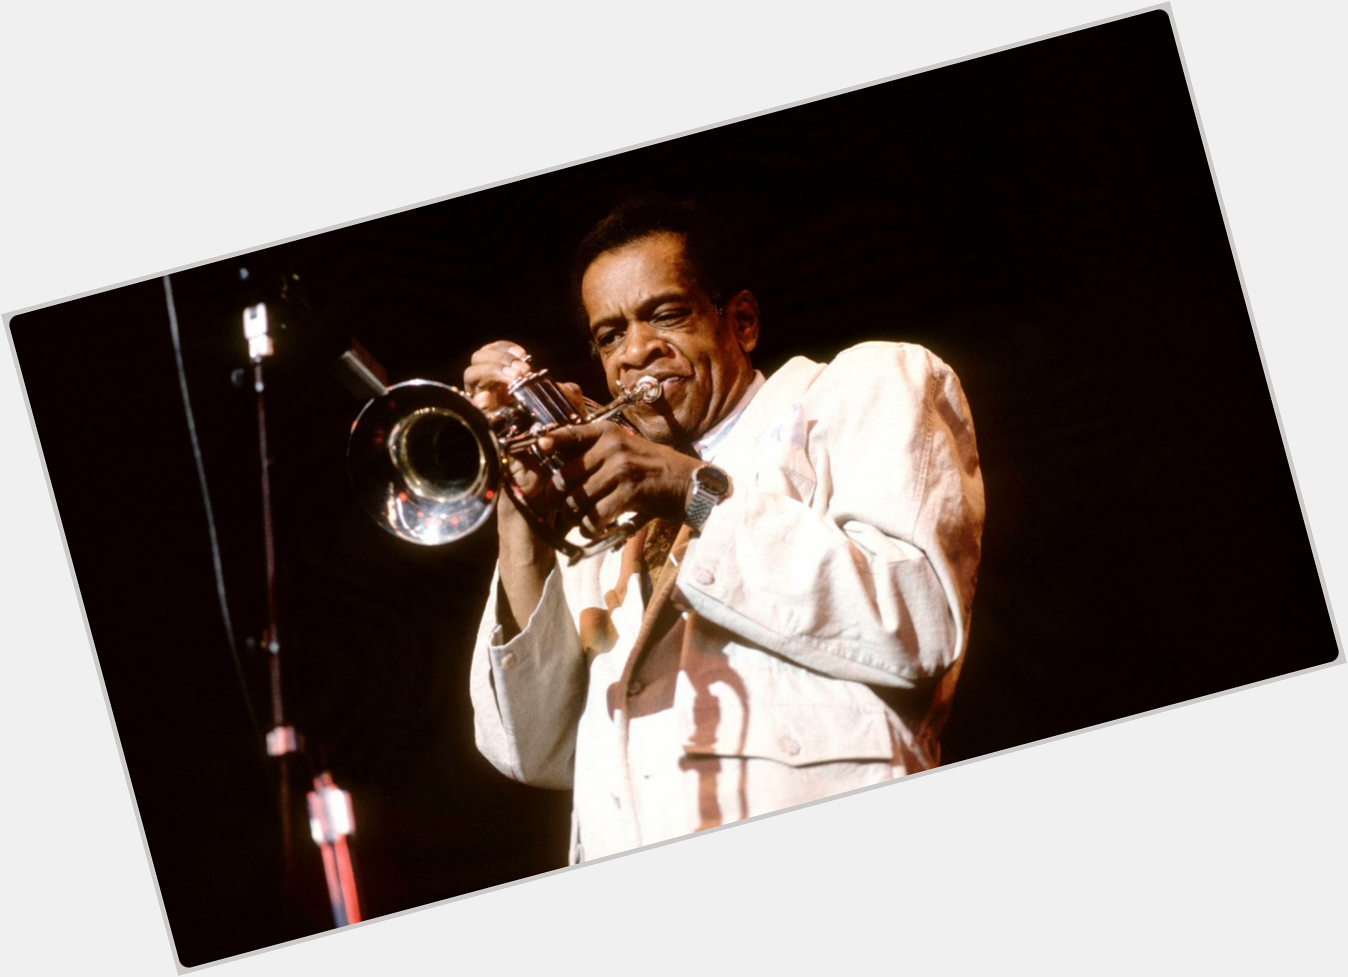 Happy birthday to Donald Byrd, who would have turned 83 today. 